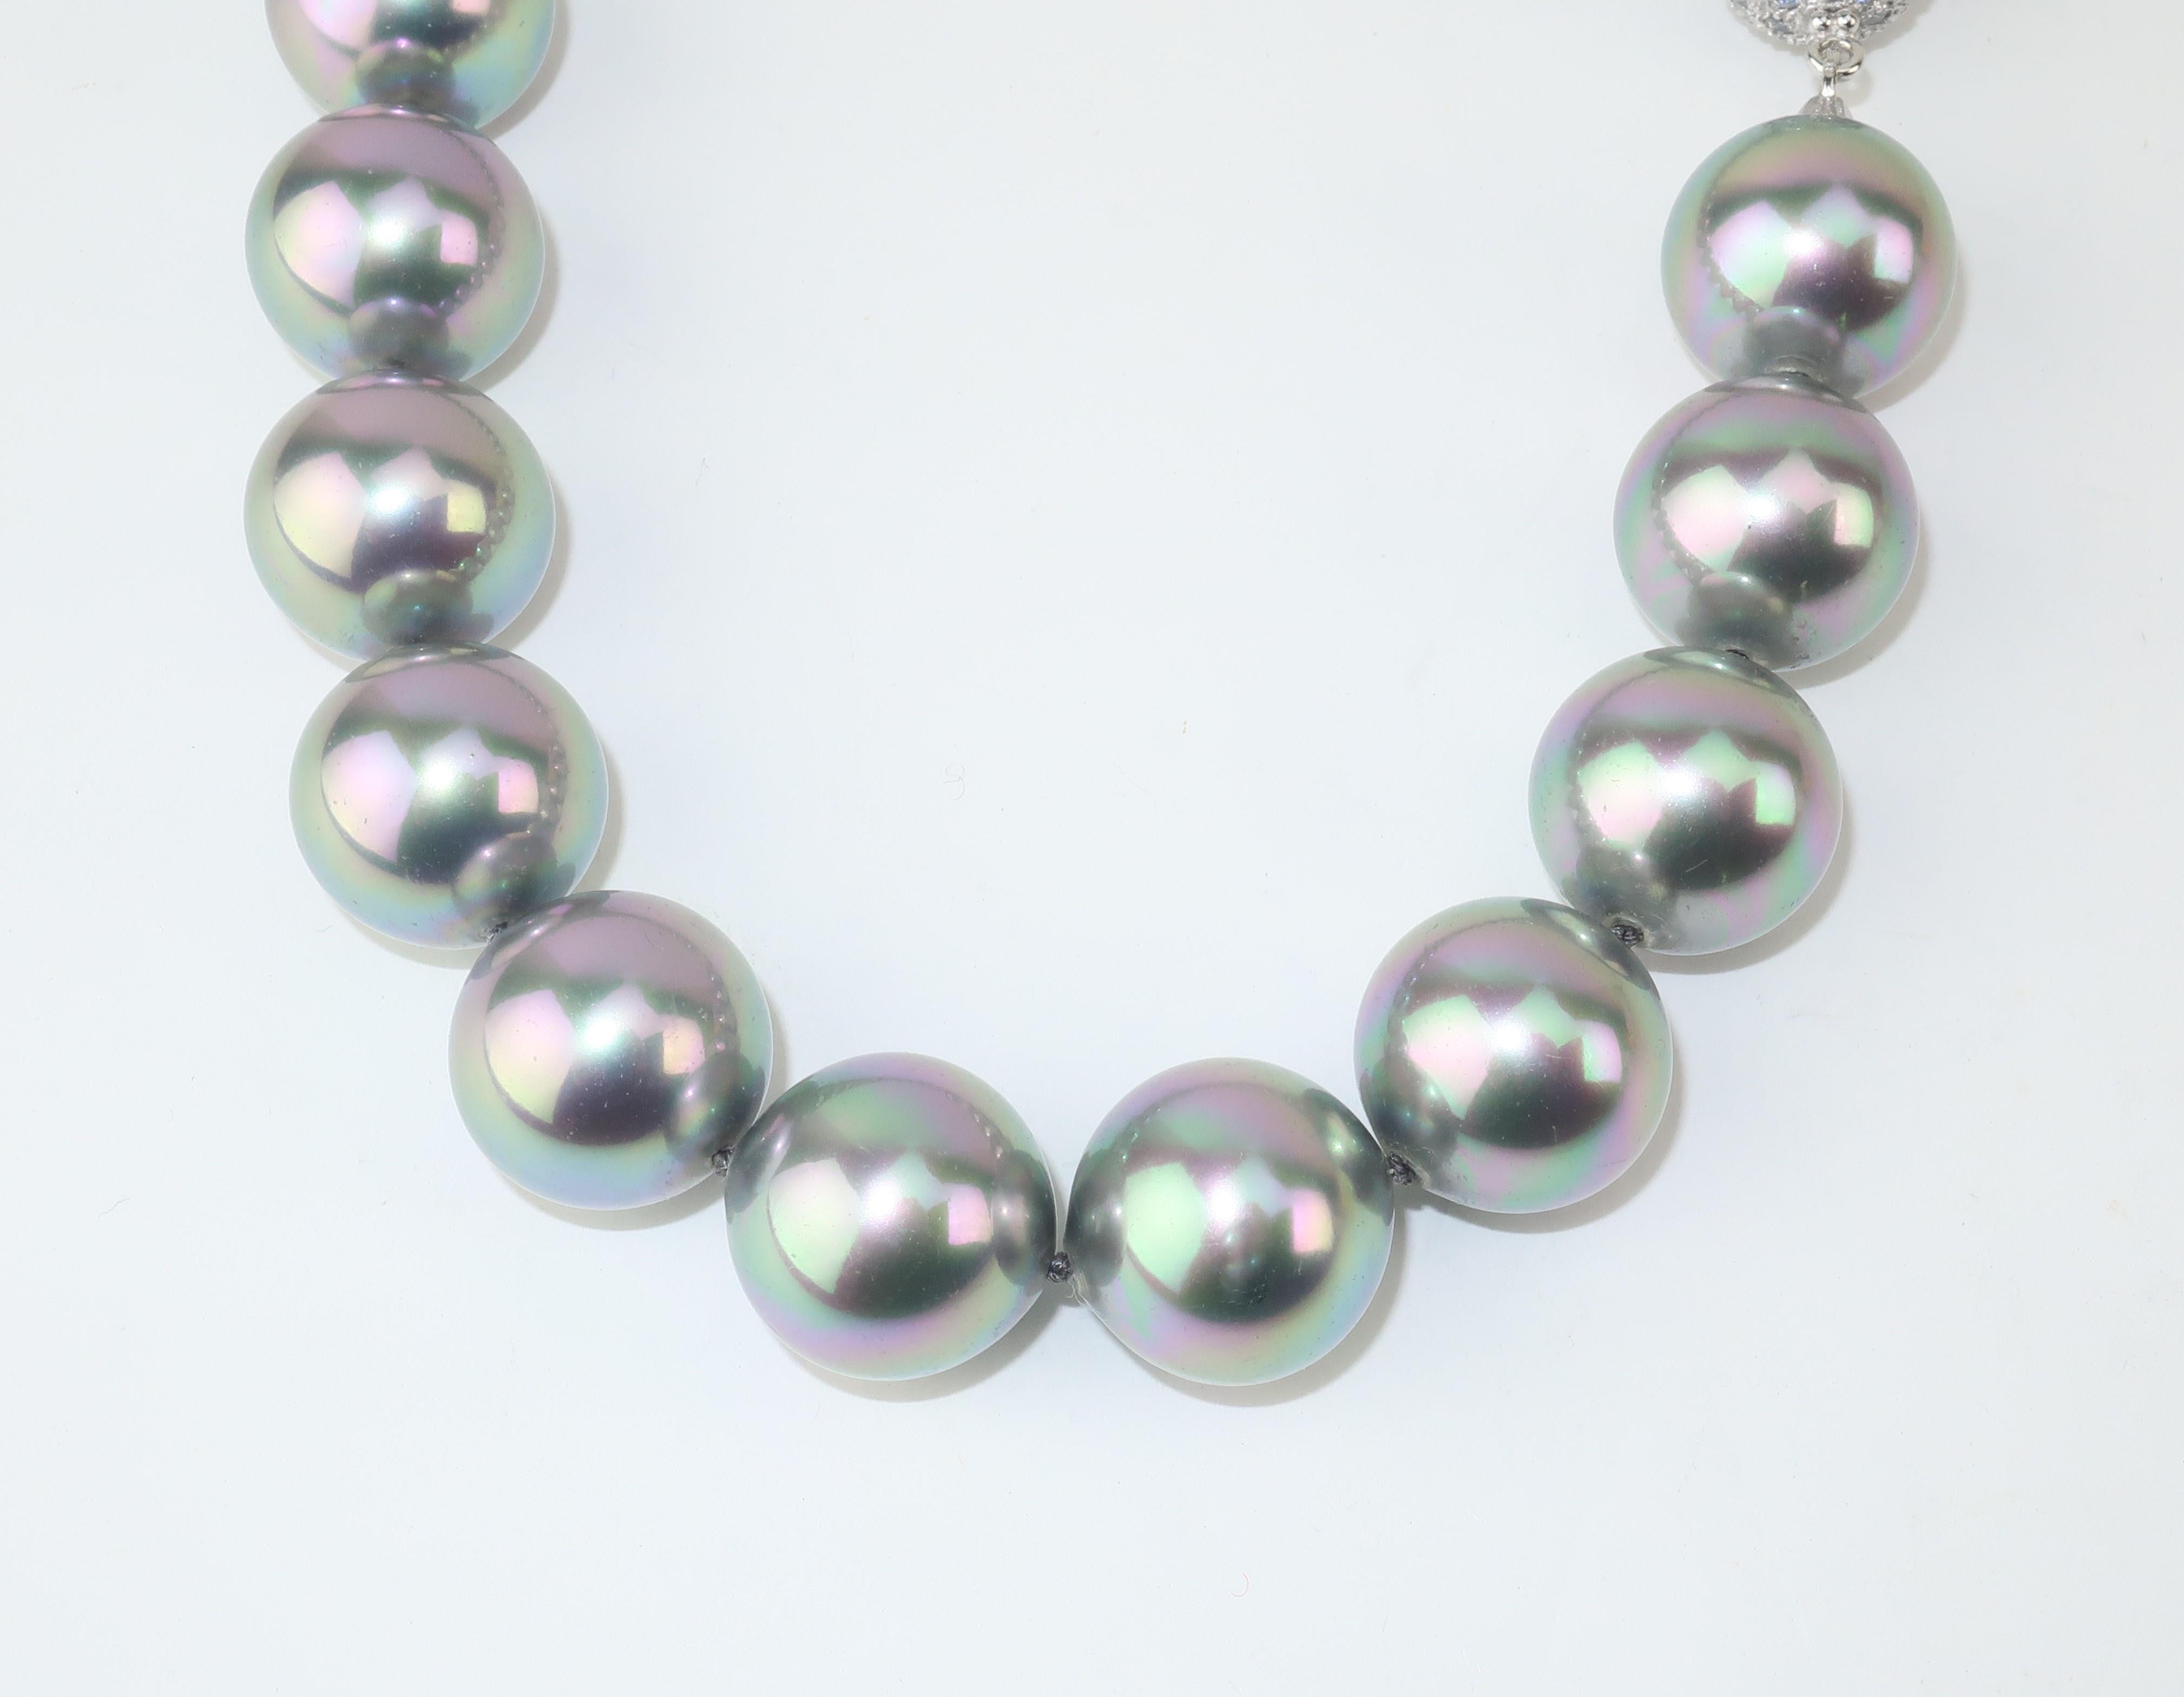 Bead Faux Gray Pearl Choker Necklace With Rhinestone Closure For Sale